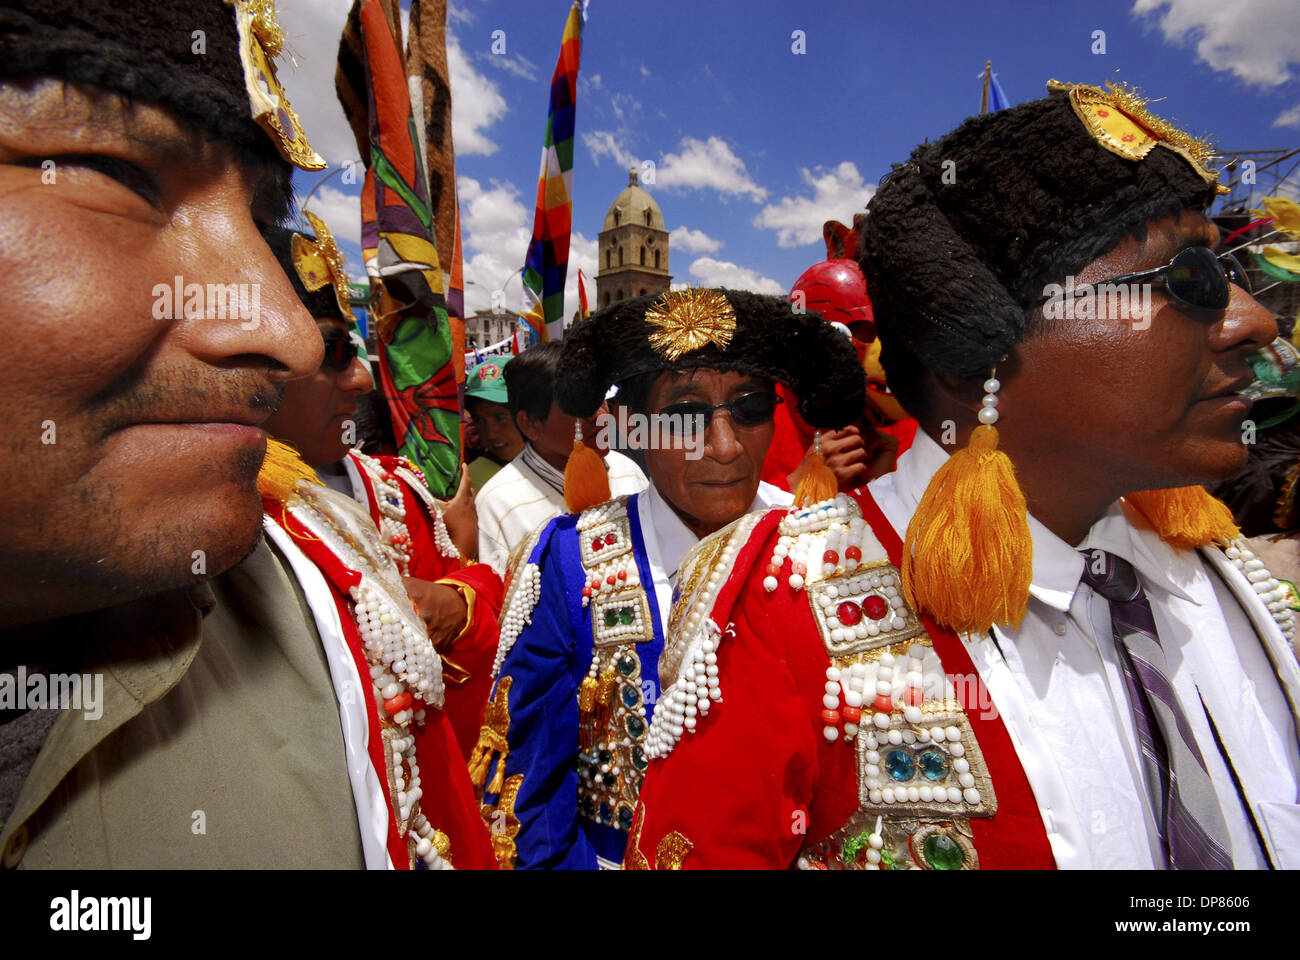 Oct 12, 2006 - La Paz, Bolivia - Militants of the MAS (Movement Towards Socialism) Evo's political party, clothed as Spanish 'torreadores' during a ceremony to comemorate the 514th anniversary of Spanish Invasion to the South American continent and indigenous resistance. The MAS are responding to social movements' calls for 'nationalization' and 'social control,' which has resulted Stock Photo